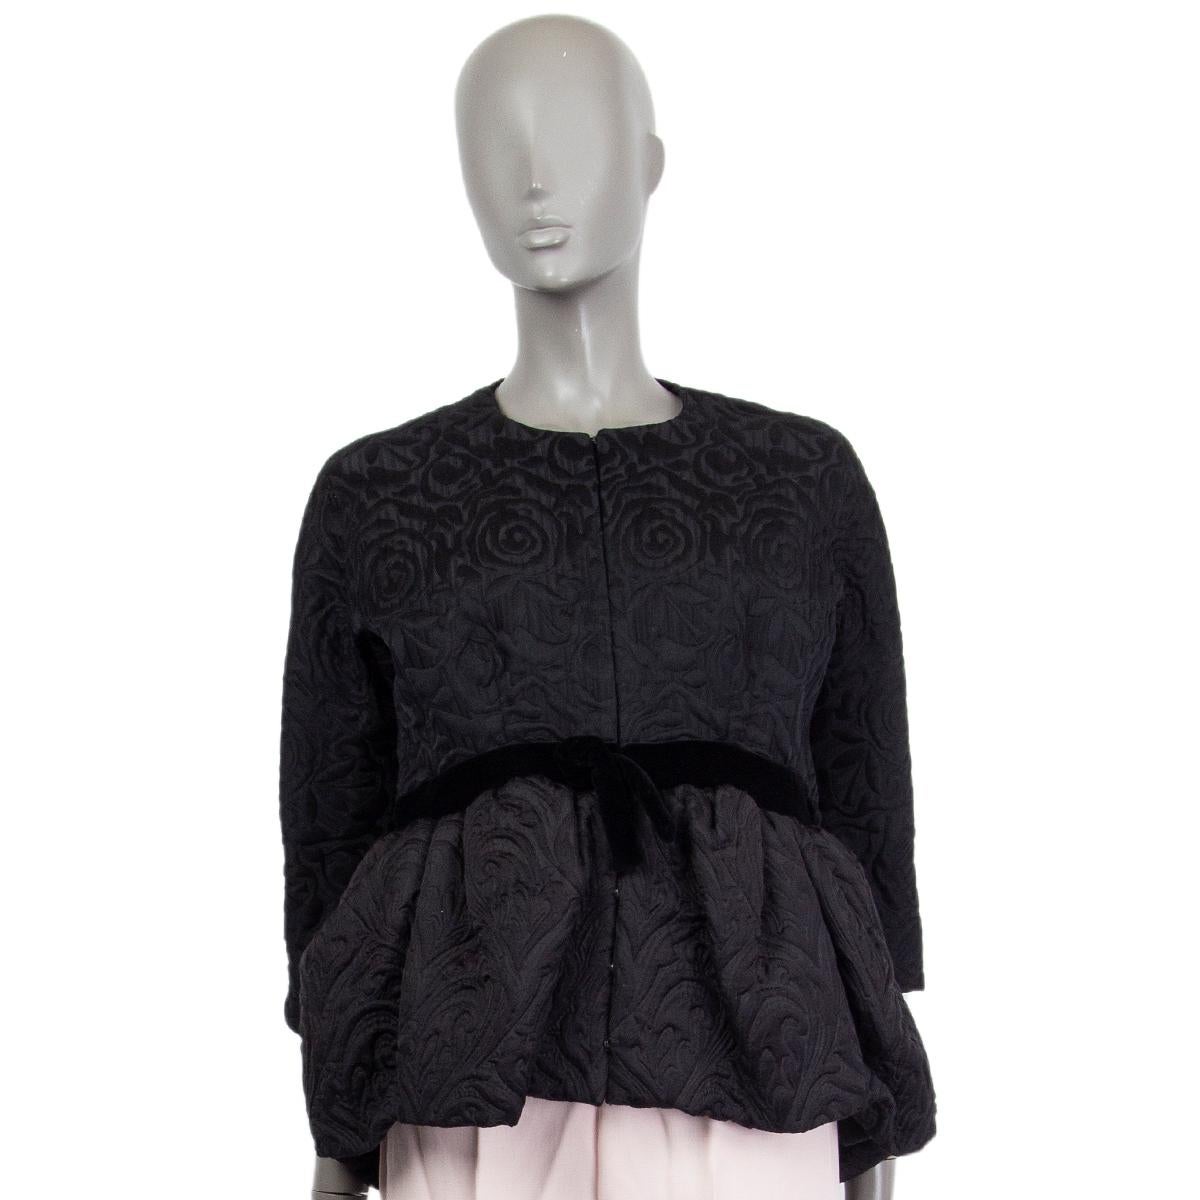 100% authentic Balenciaga peplum jacquard jacket in black cotton (43%), wool (42%) and silk (15%) with velvet waist band. Closes with concelead hooks and snaps. Lined in silk (100%). Raglan sleeves (sleeve measurement taken from the neck). Has been